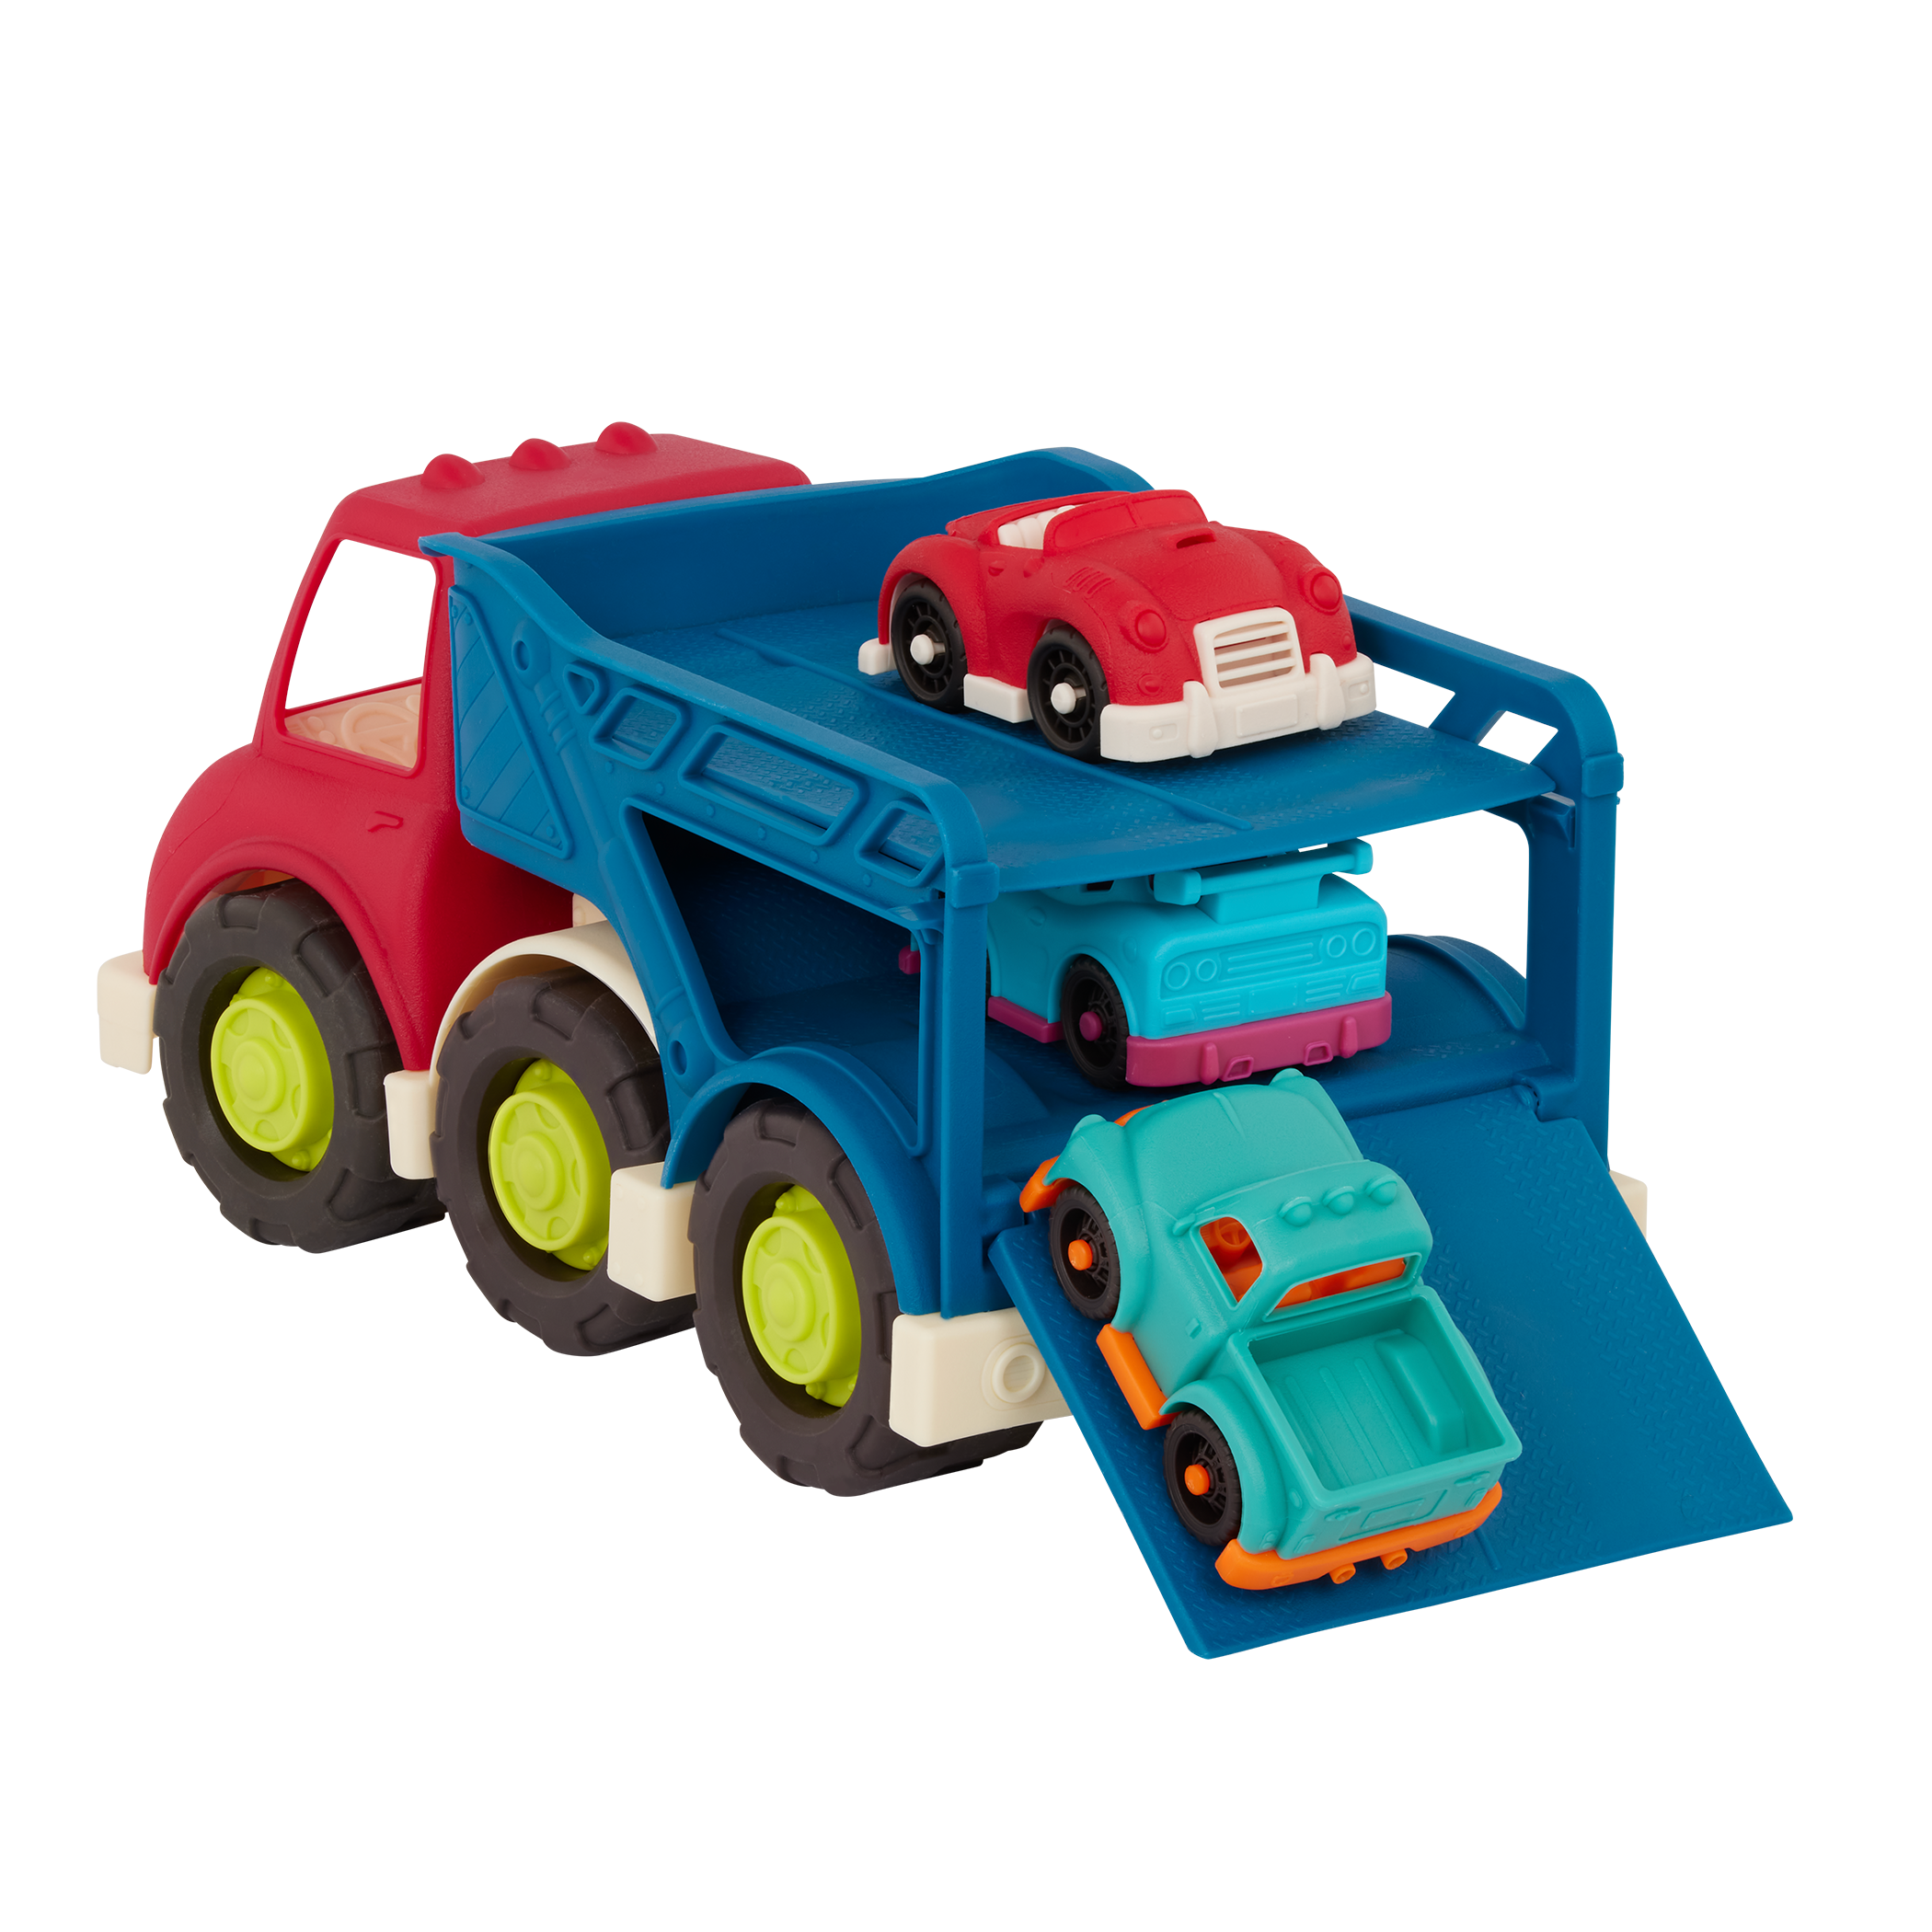  Toy Truck Car Carrier - Includes 6 Toy Cars and